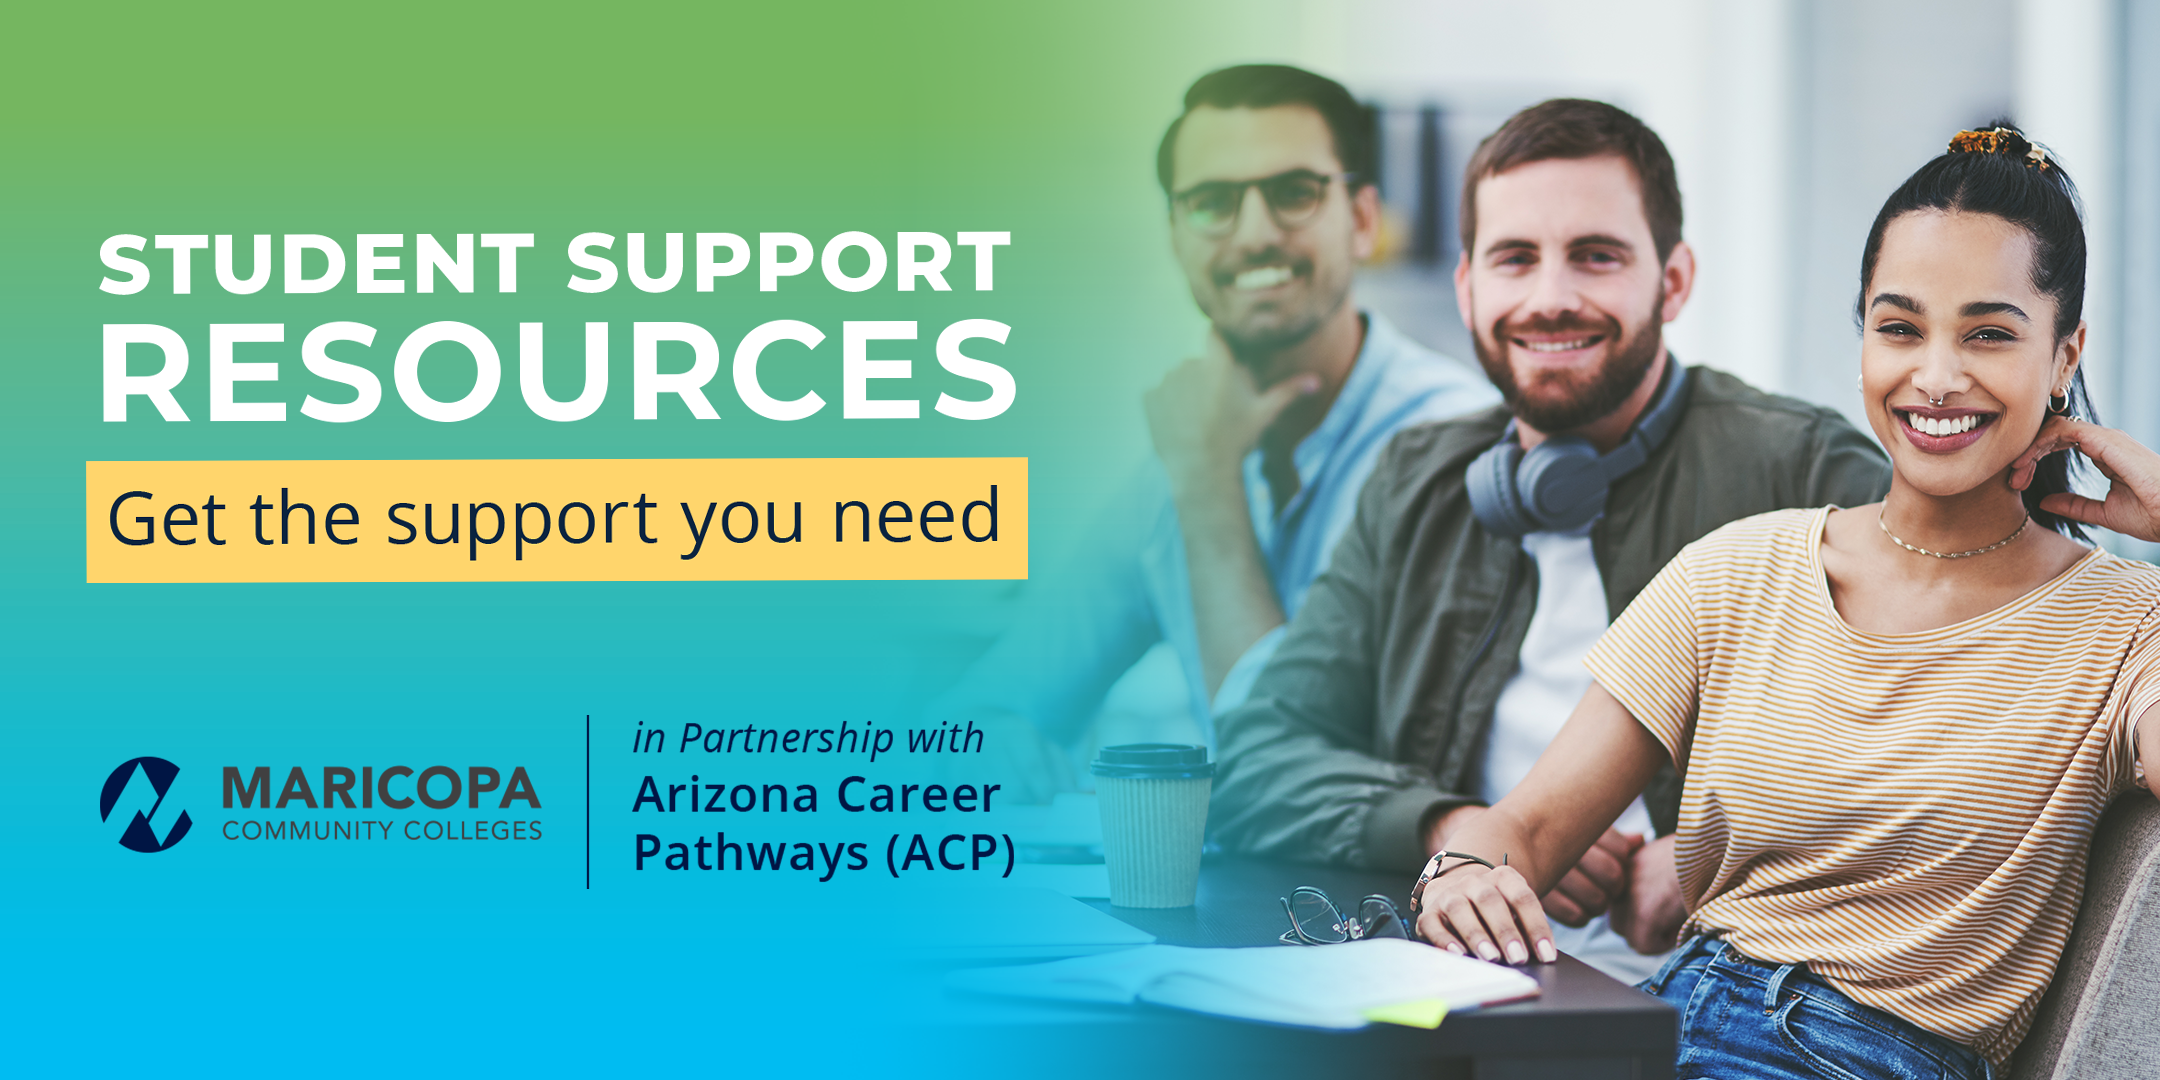 Student Support Resources - Get the support you need